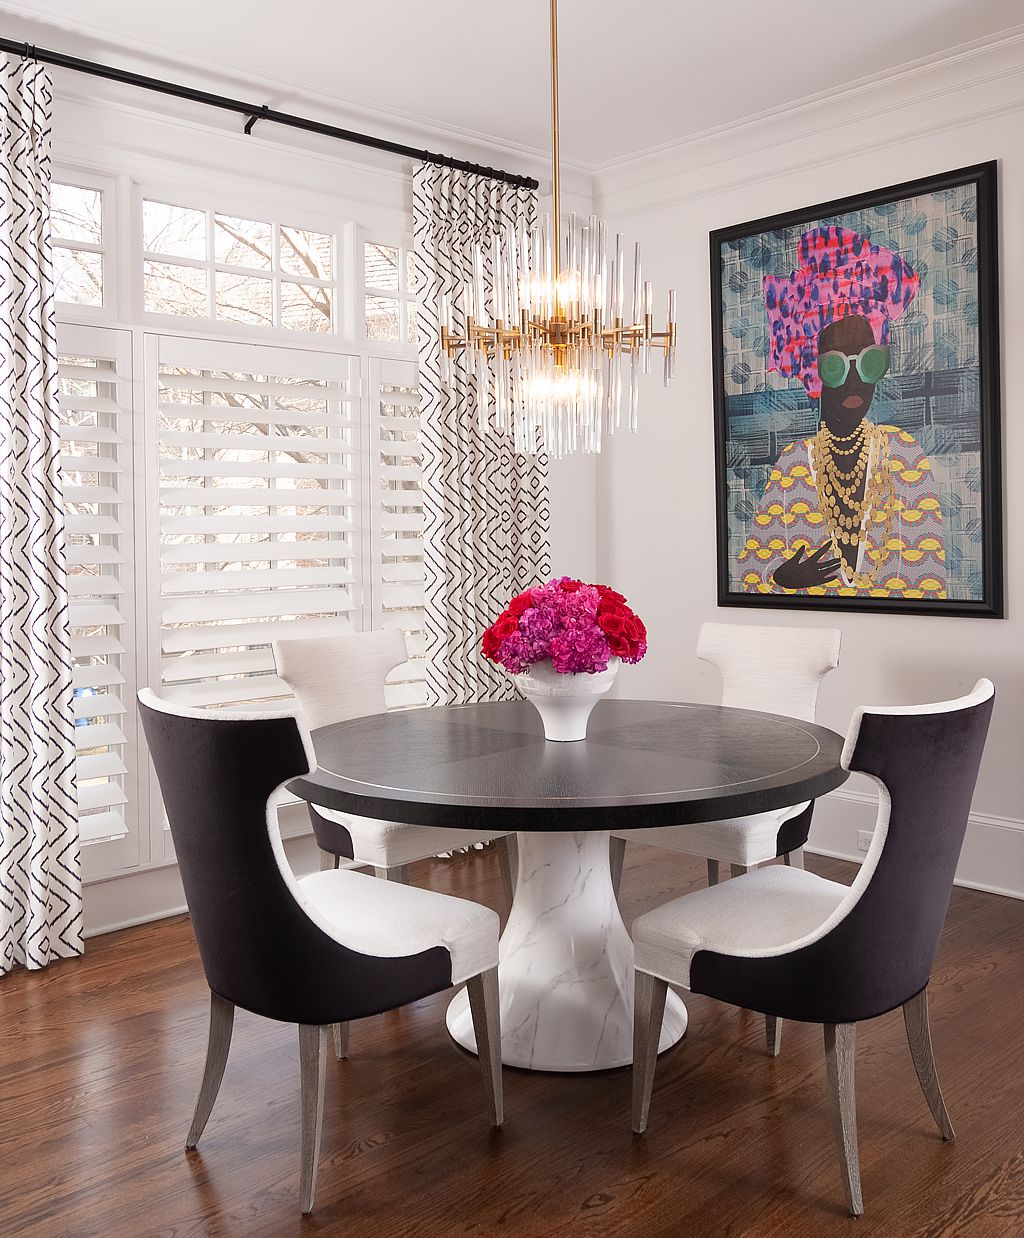 Just a touch of pink in the artwork and flowers of this black and white kitchen.